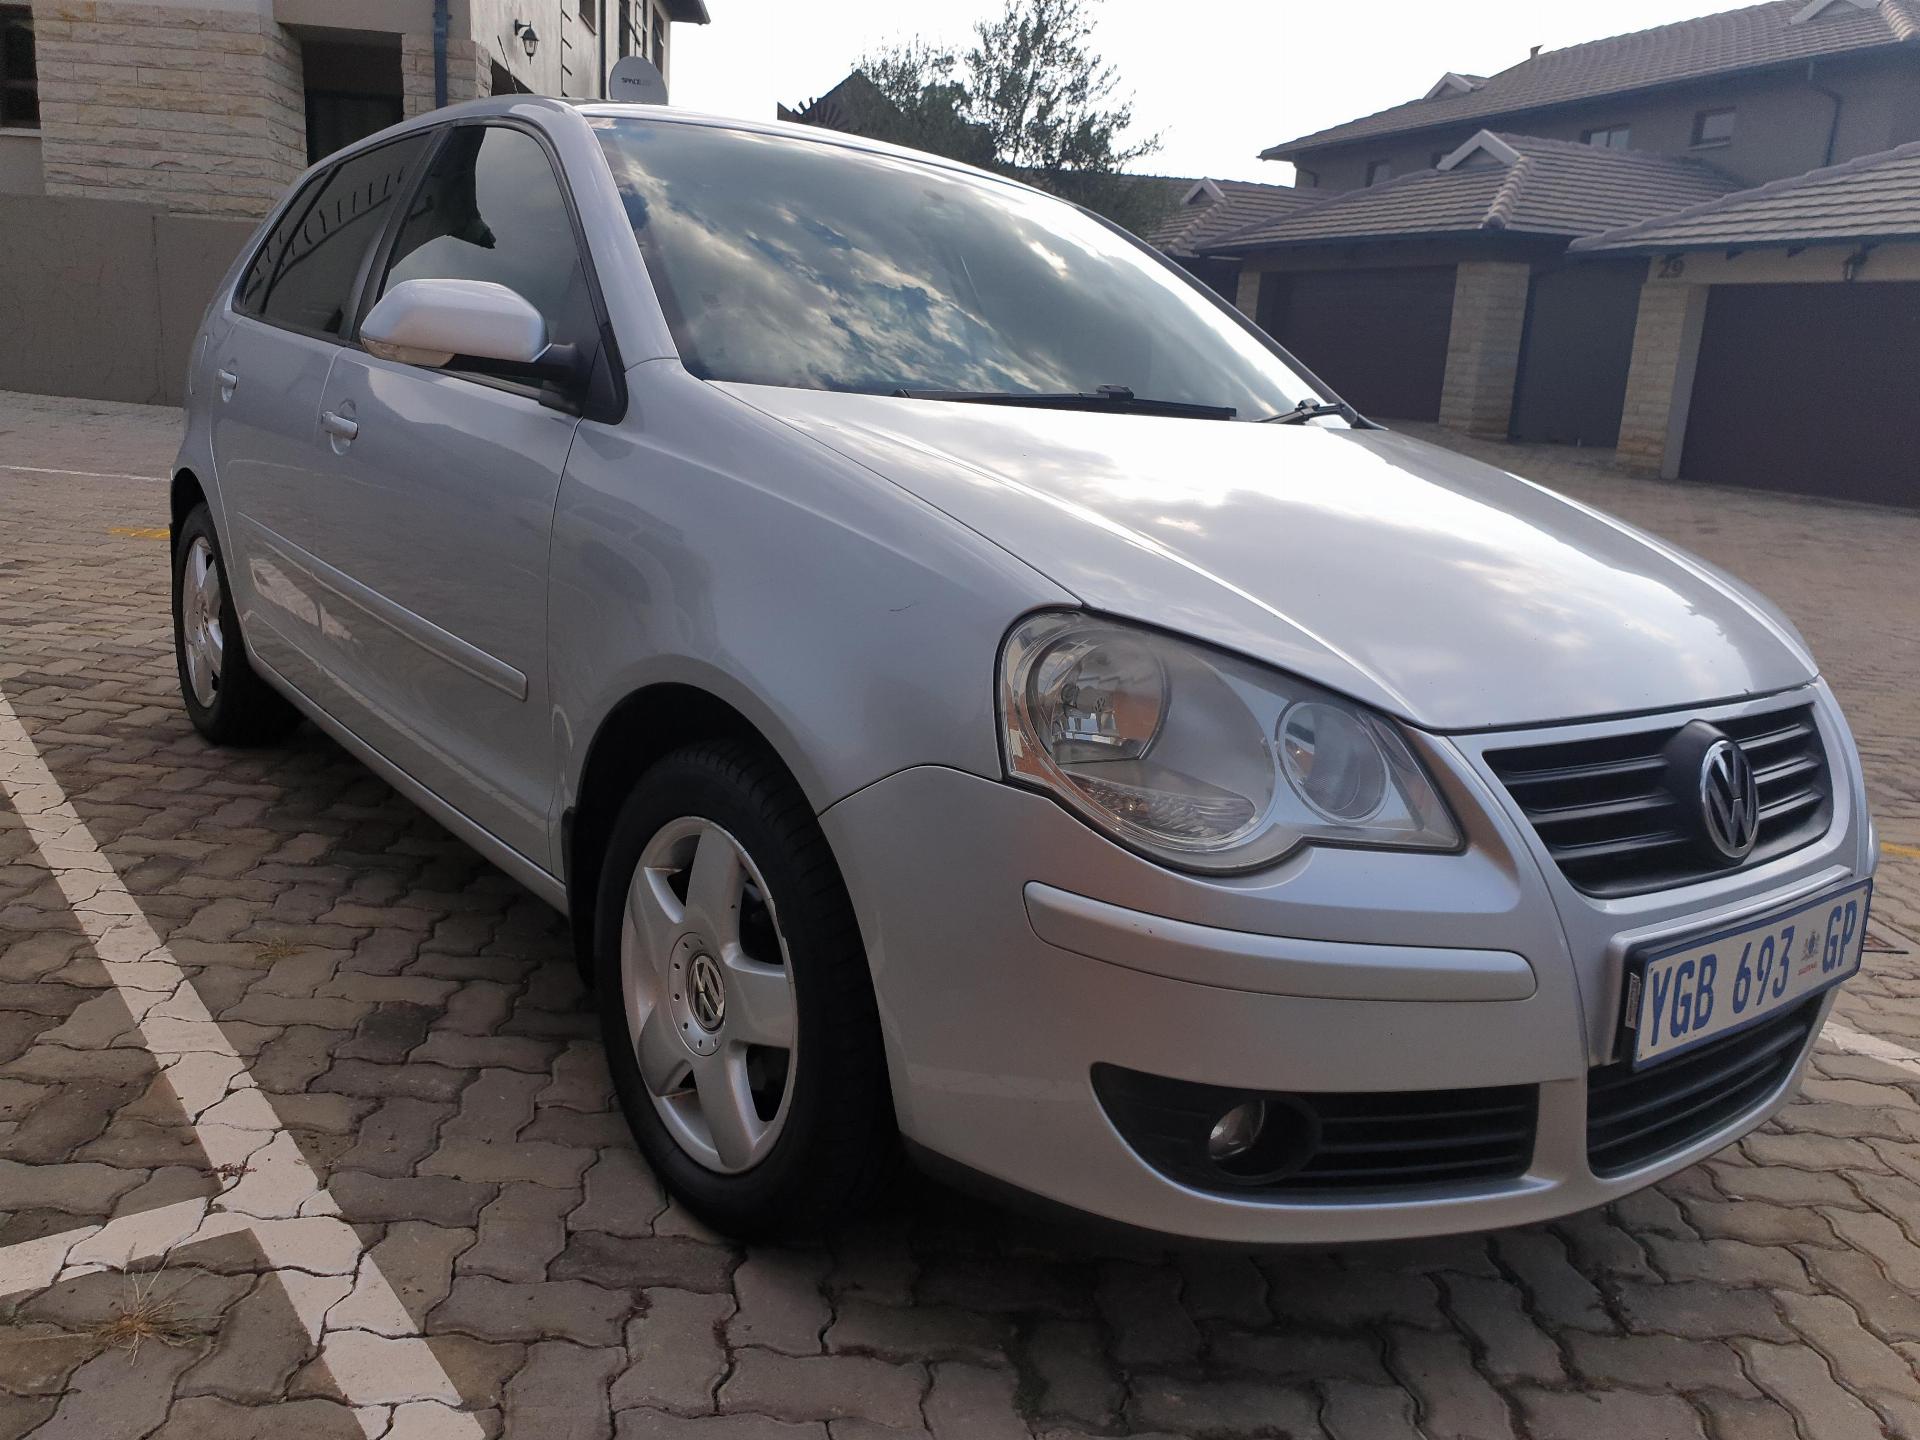 Used VW Polo 1.9 TDI 2007 on auction PV1030555